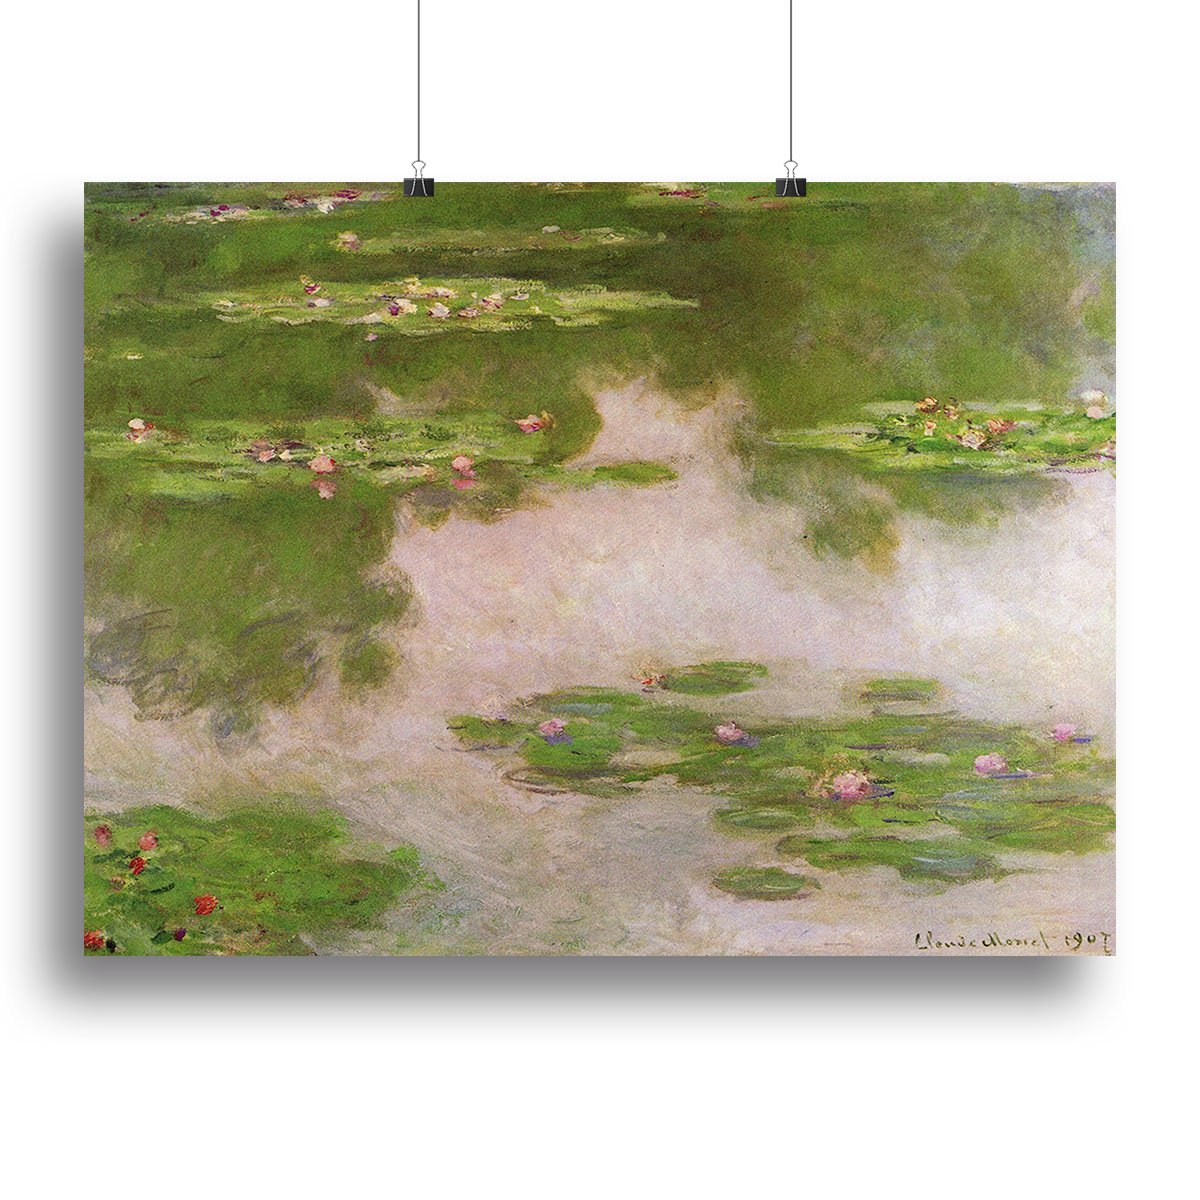 Sea roses 2 by Monet Canvas Print or Poster